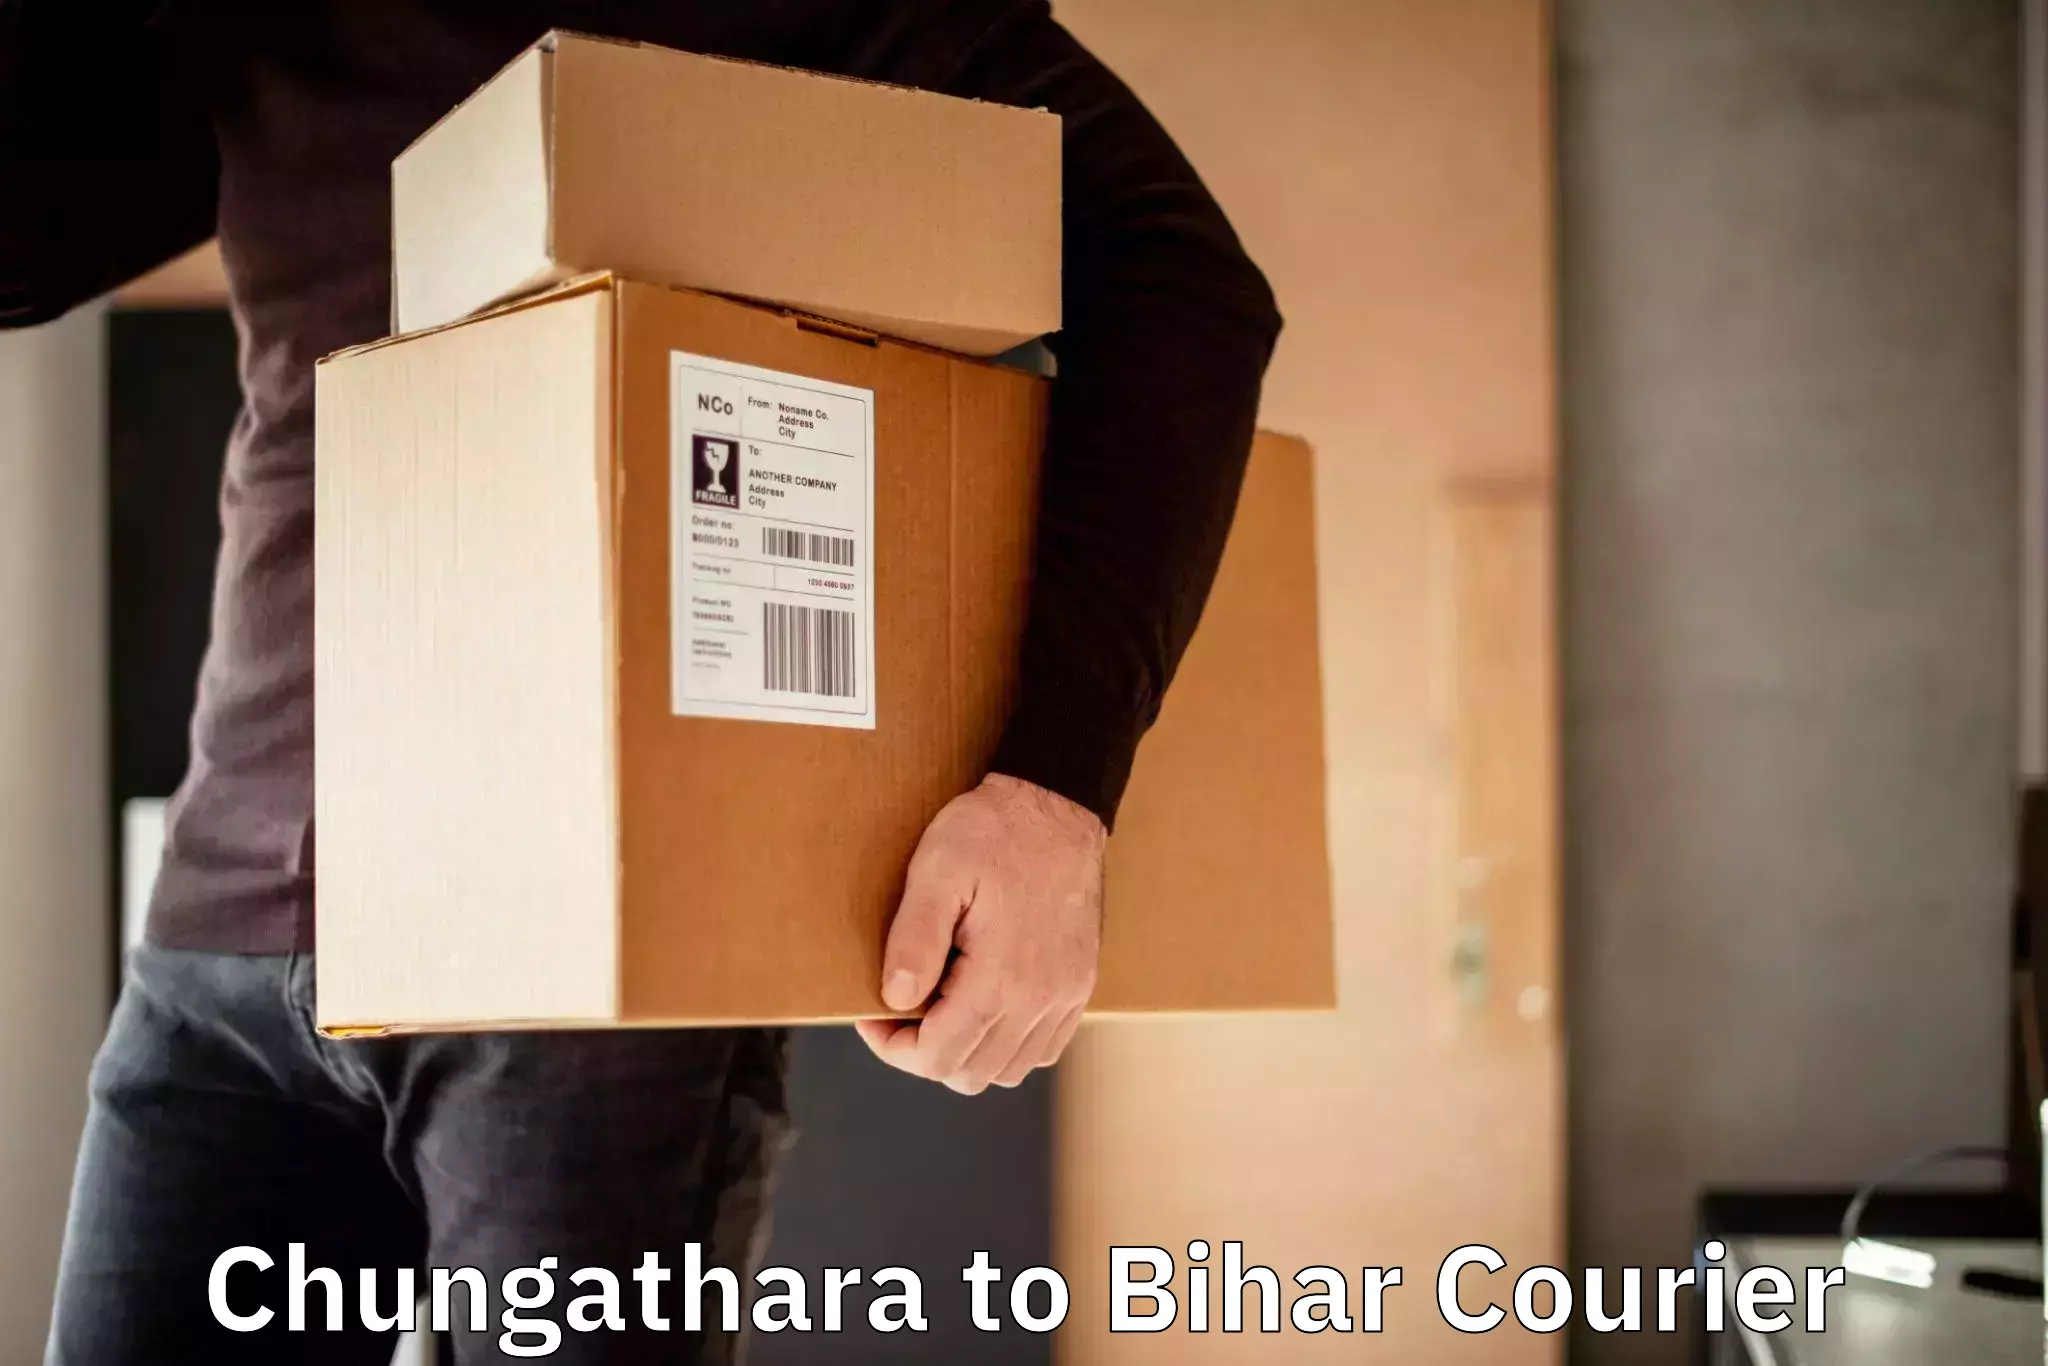 Courier service efficiency Chungathara to Mairwa